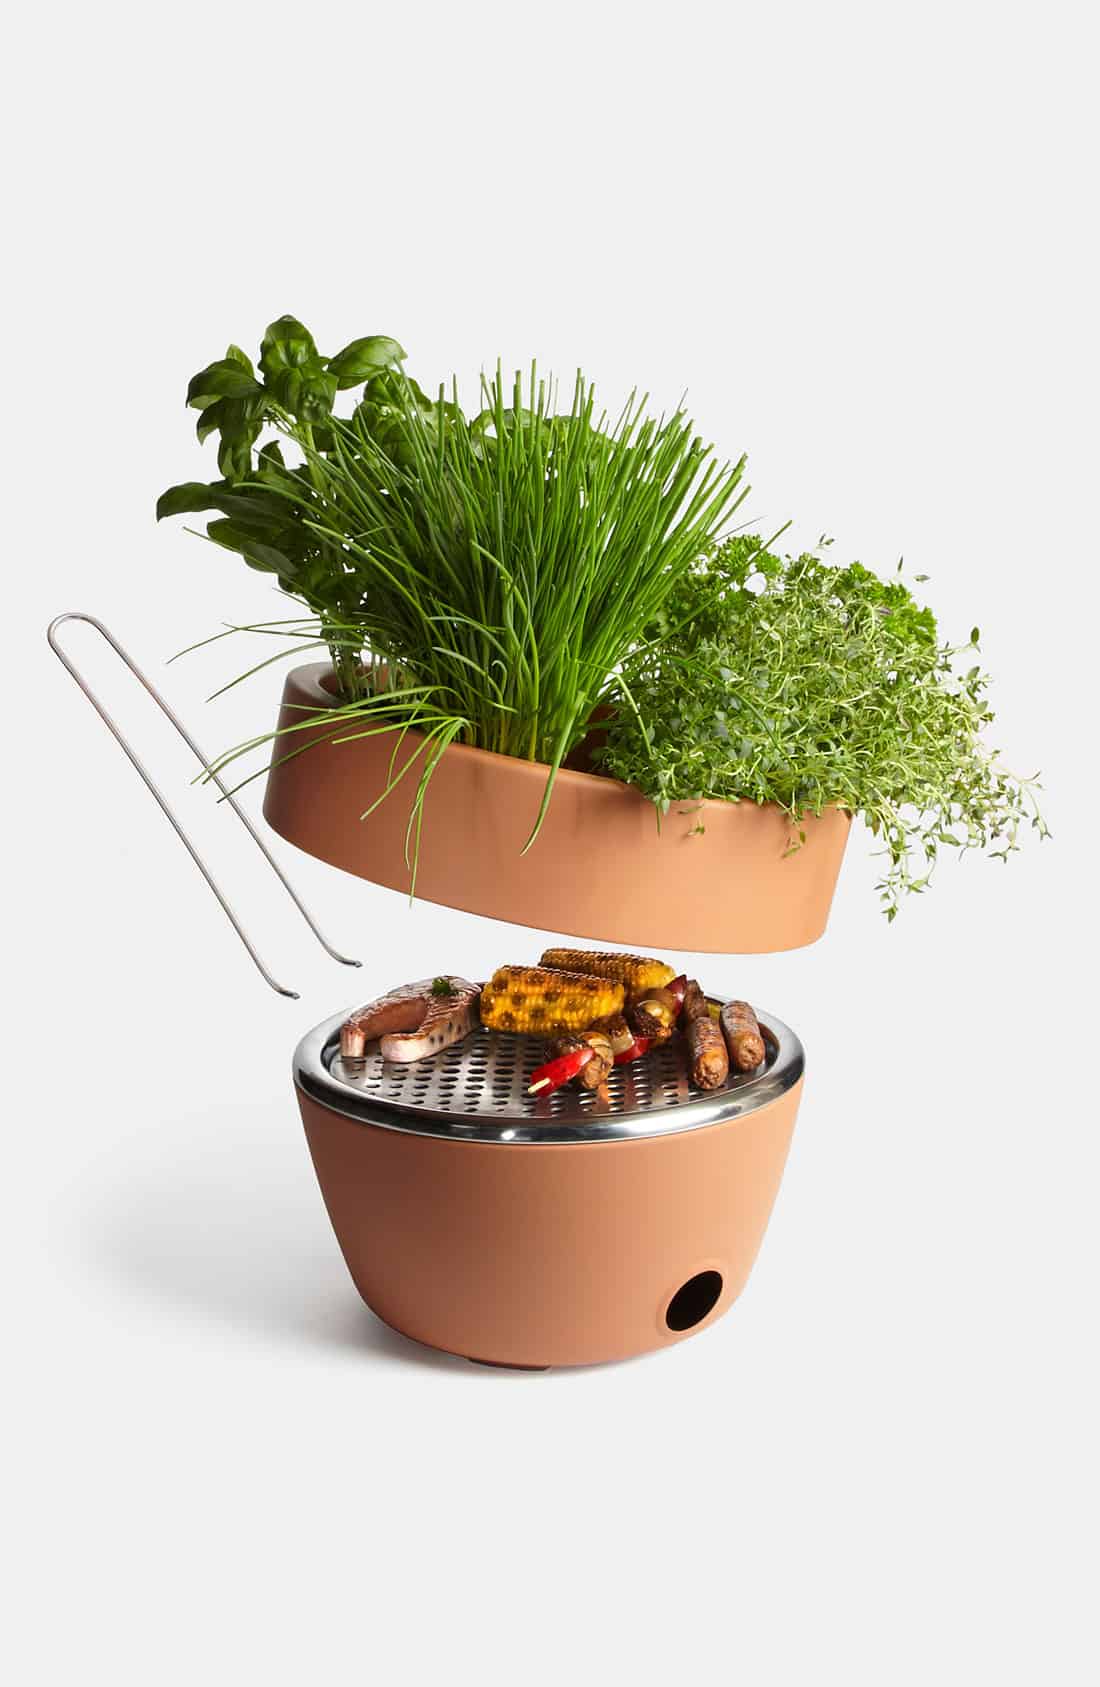 Two in One Planter & Barbecue Hidden Grill in a Flower Pot